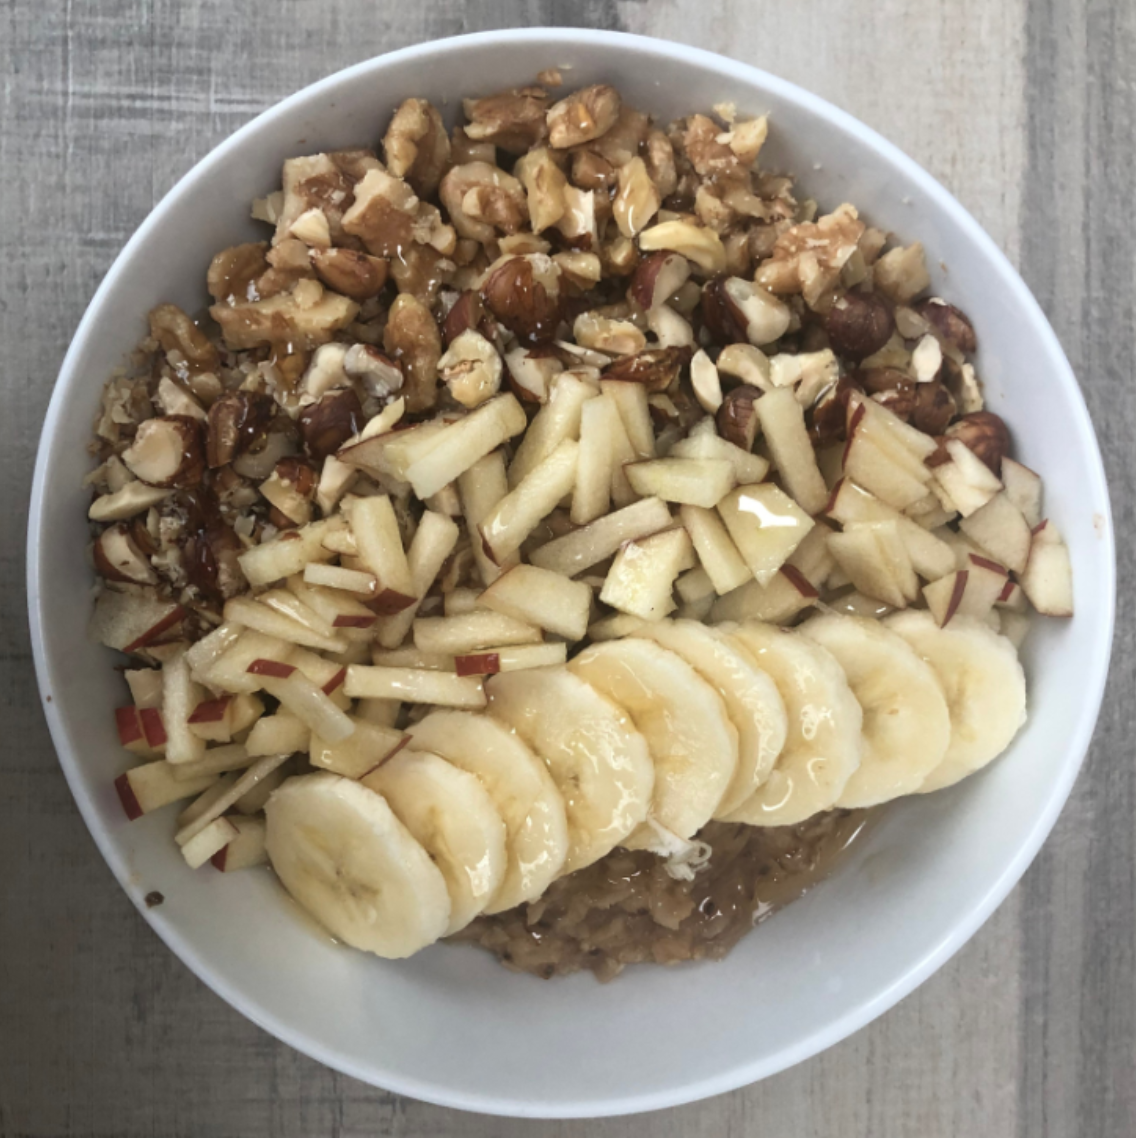 Finished gluten free apple cinnamon oatmeal topped with banana, walnuts, and honey